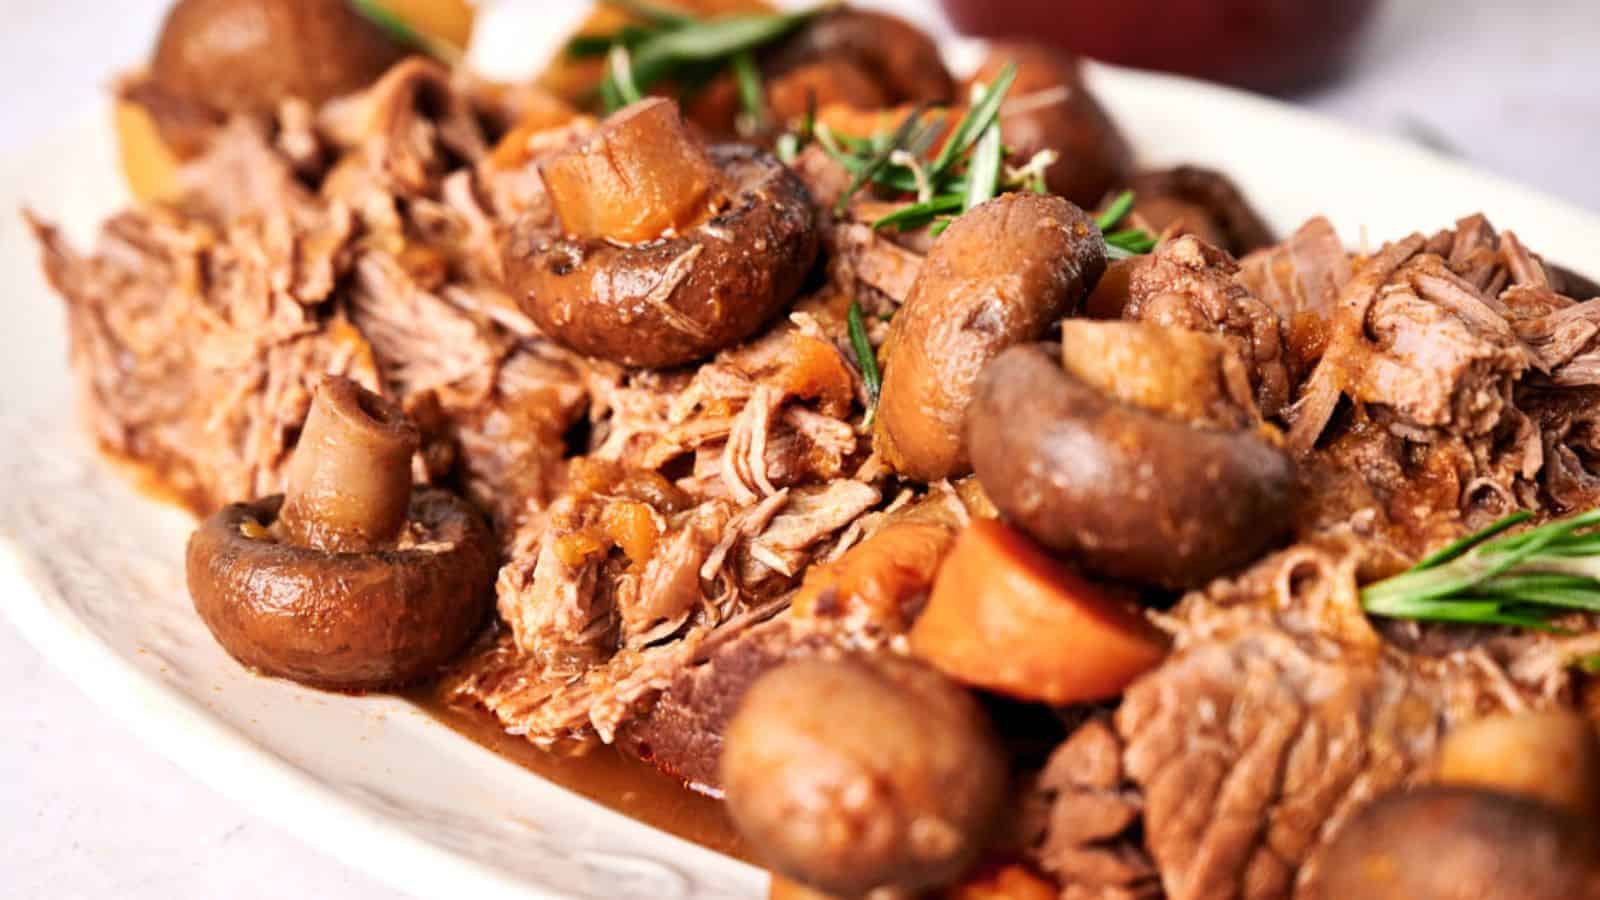 Slow cooker pot roast with mushrooms and carrots garnished with fresh rosemary.